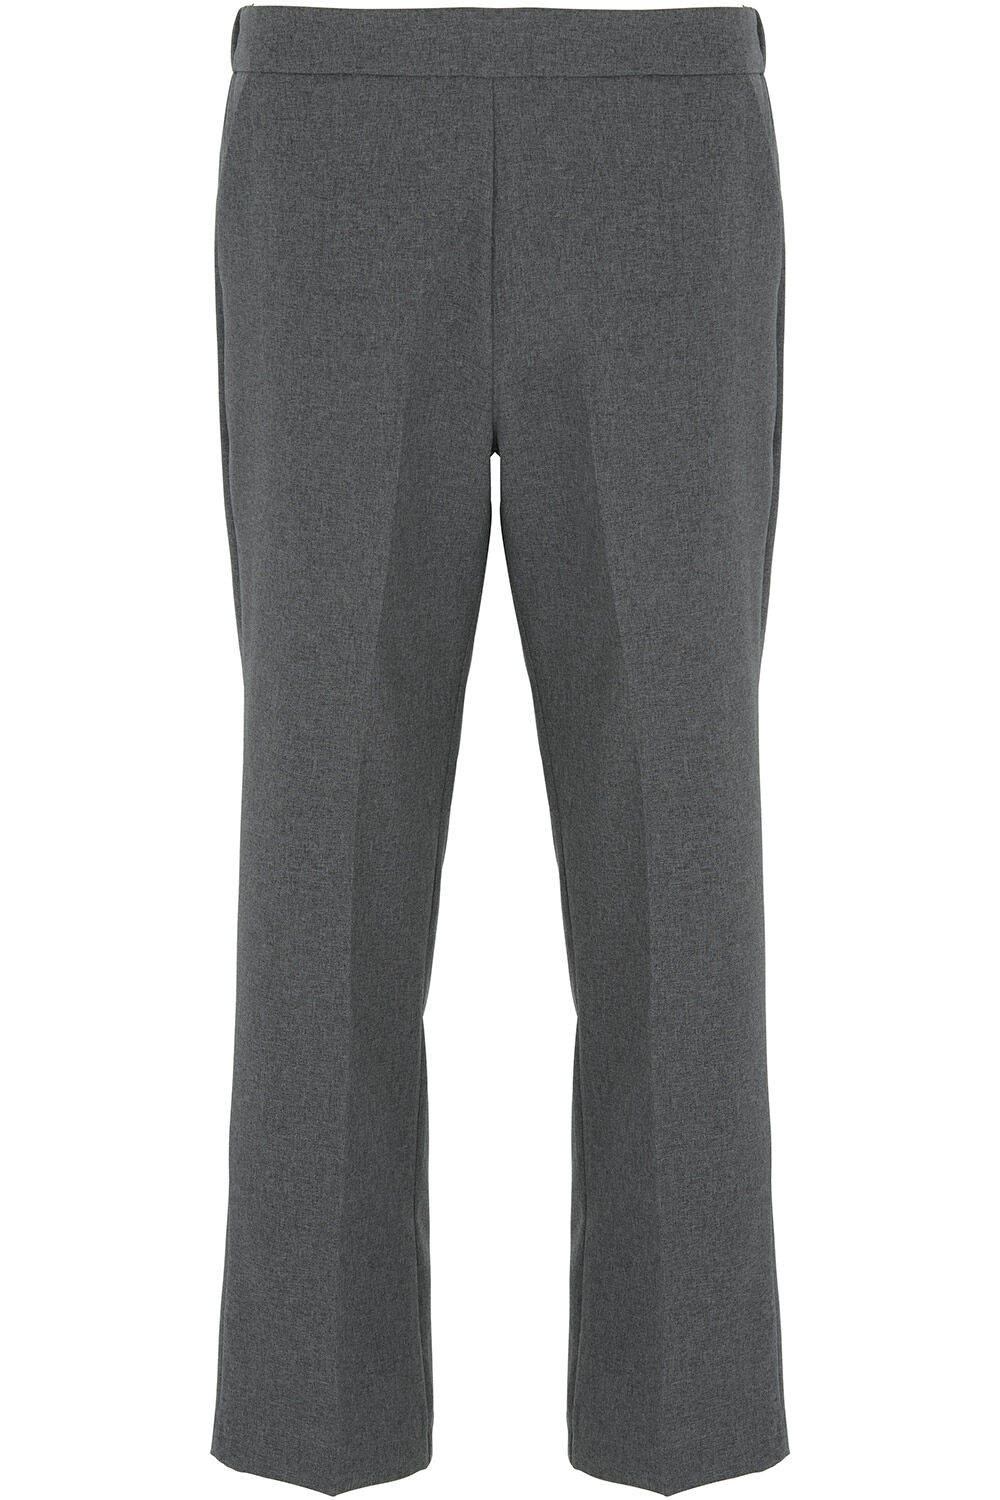 Bonmarche Ladies Grey Straight Leg Pull- On Trousers, Size: 20